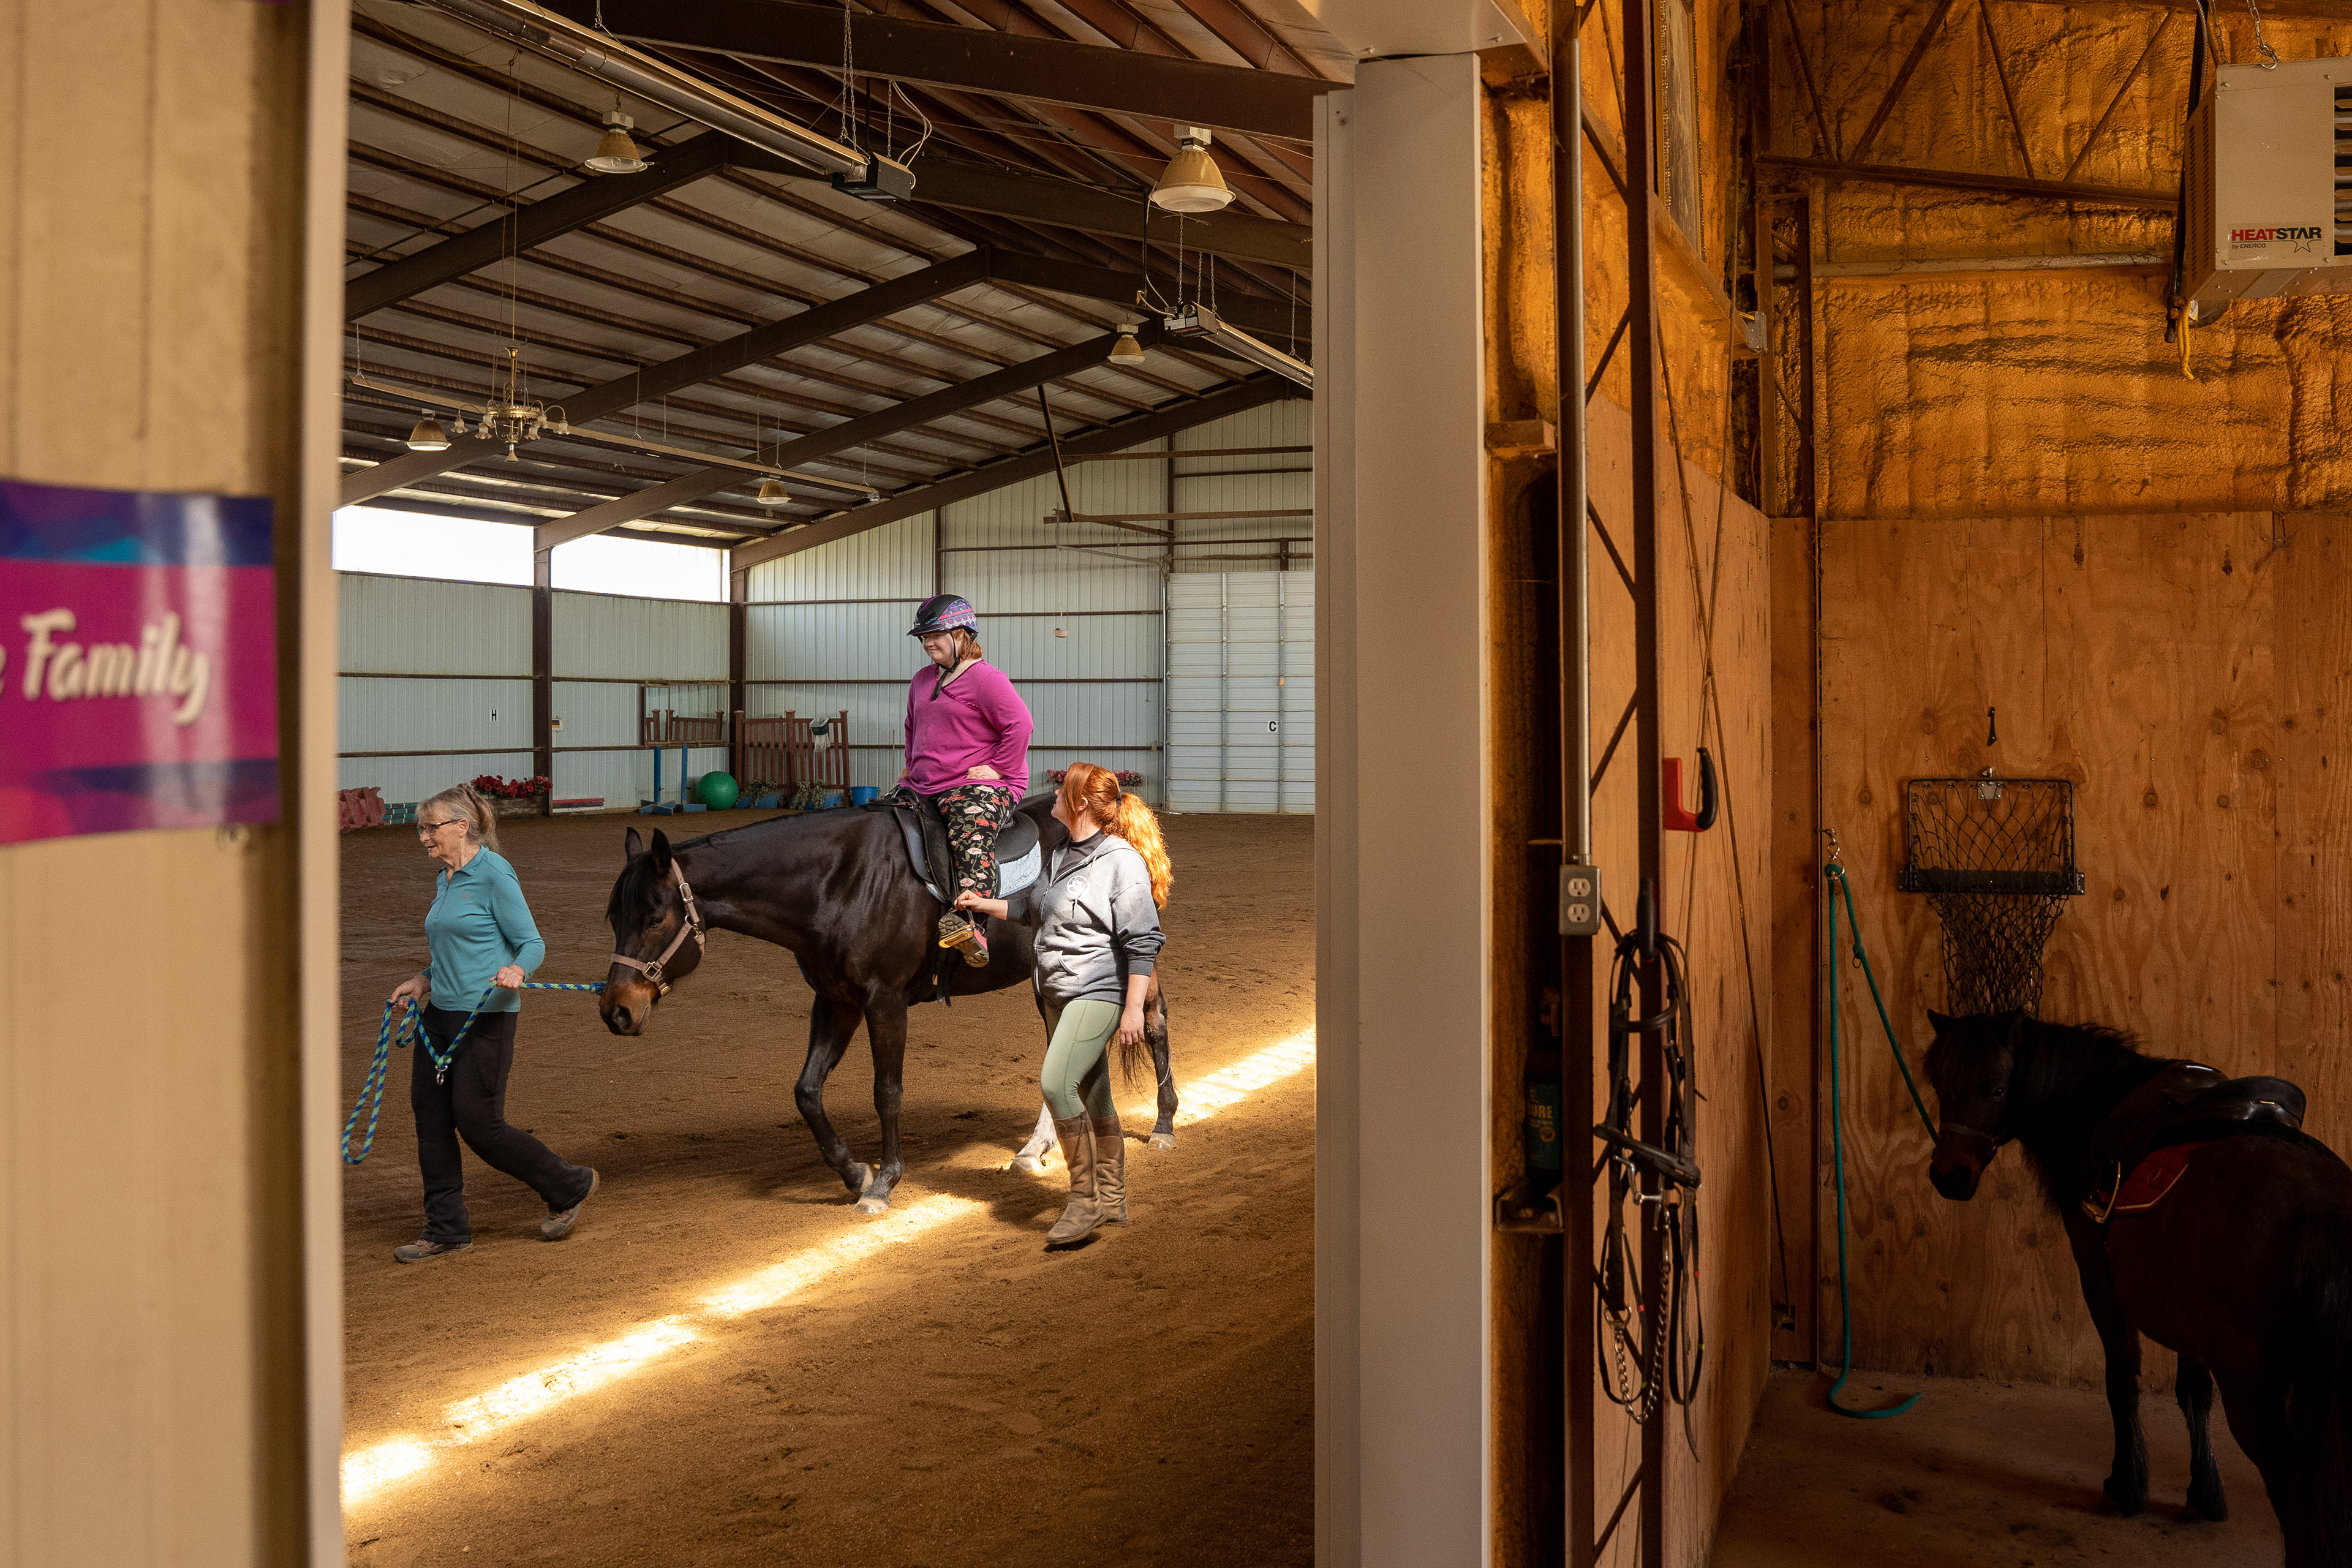 A photo of a young woman on a horse being led around a barn.